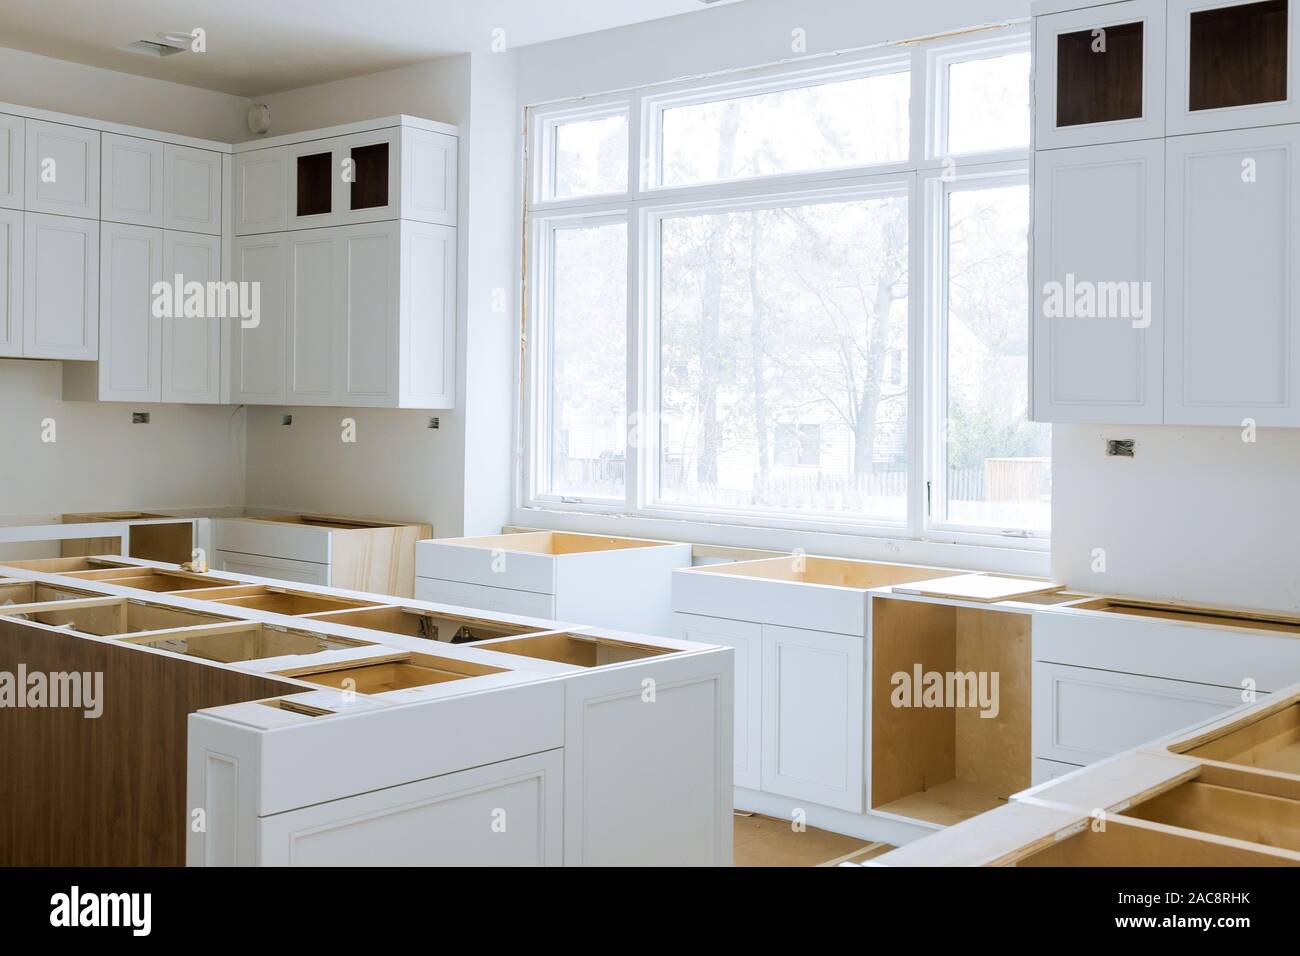 Wooden Cabinets Installation Of In The White Modular Kitchen Of